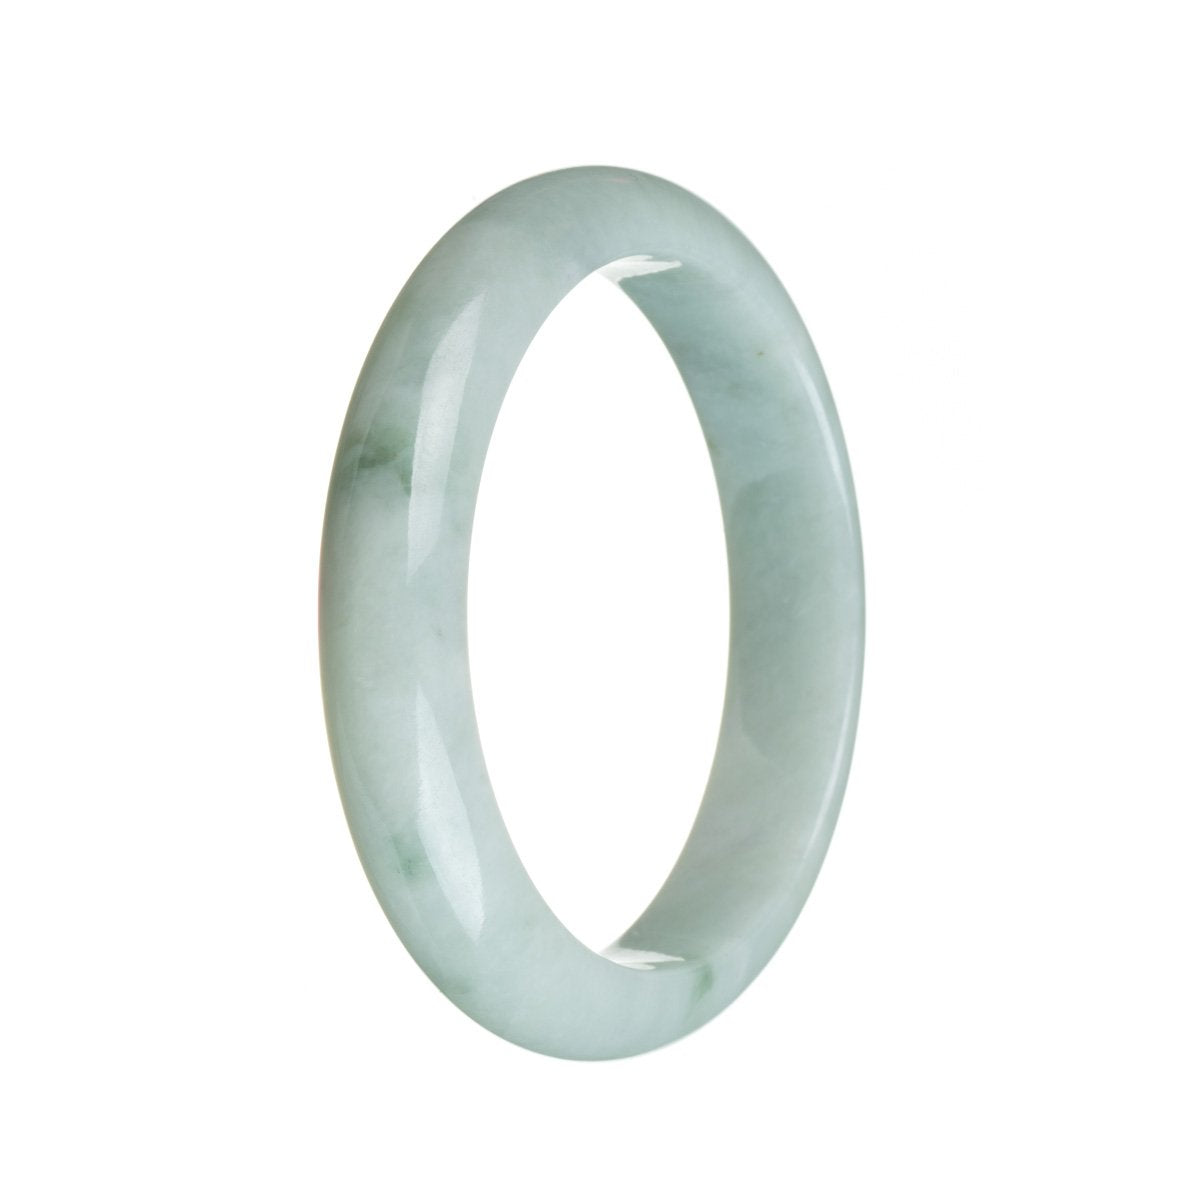 A pale green jadeite jade bracelet with a half moon shape, crafted with authentic Grade A jade. Expertly designed by MAYS GEMS.